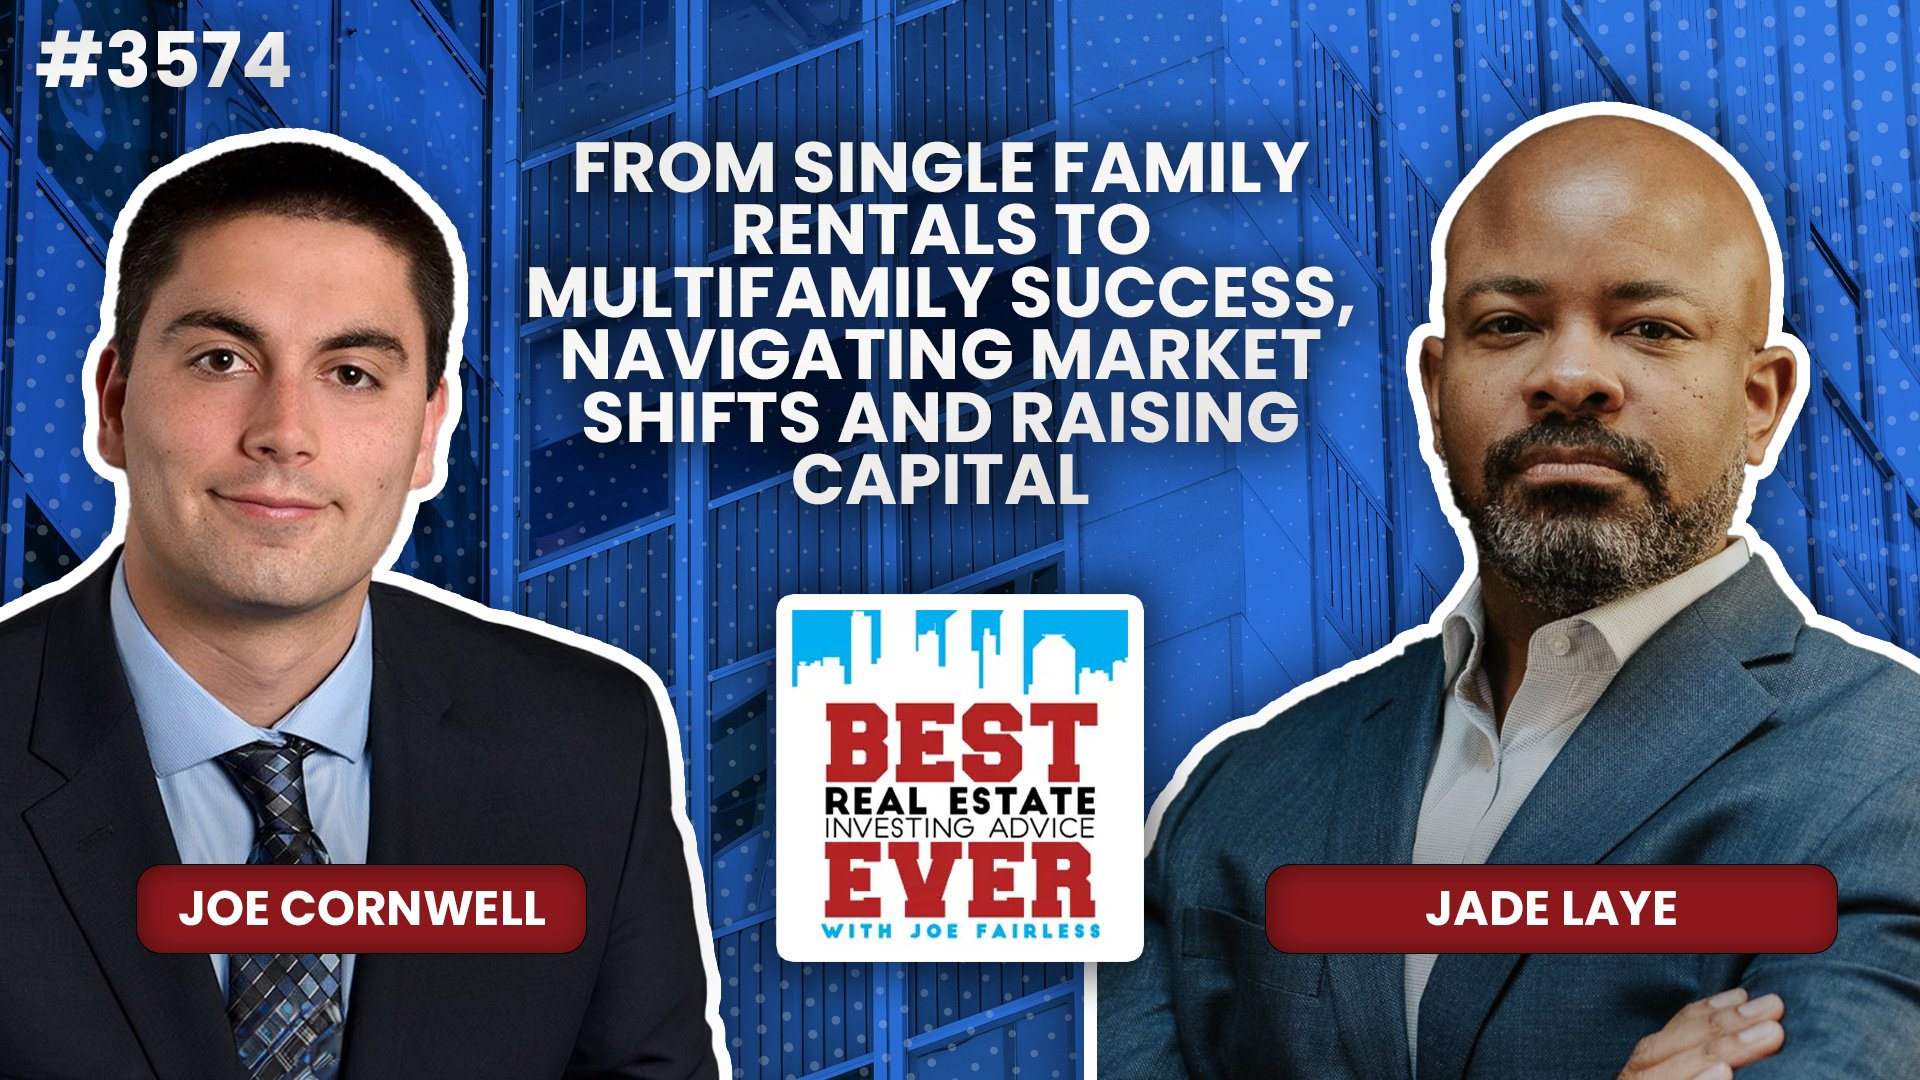 JF3574: From Single Family Rentals to Multifamily Success, Navigating Market Shifts and Raising Capital ft. Jade Laye